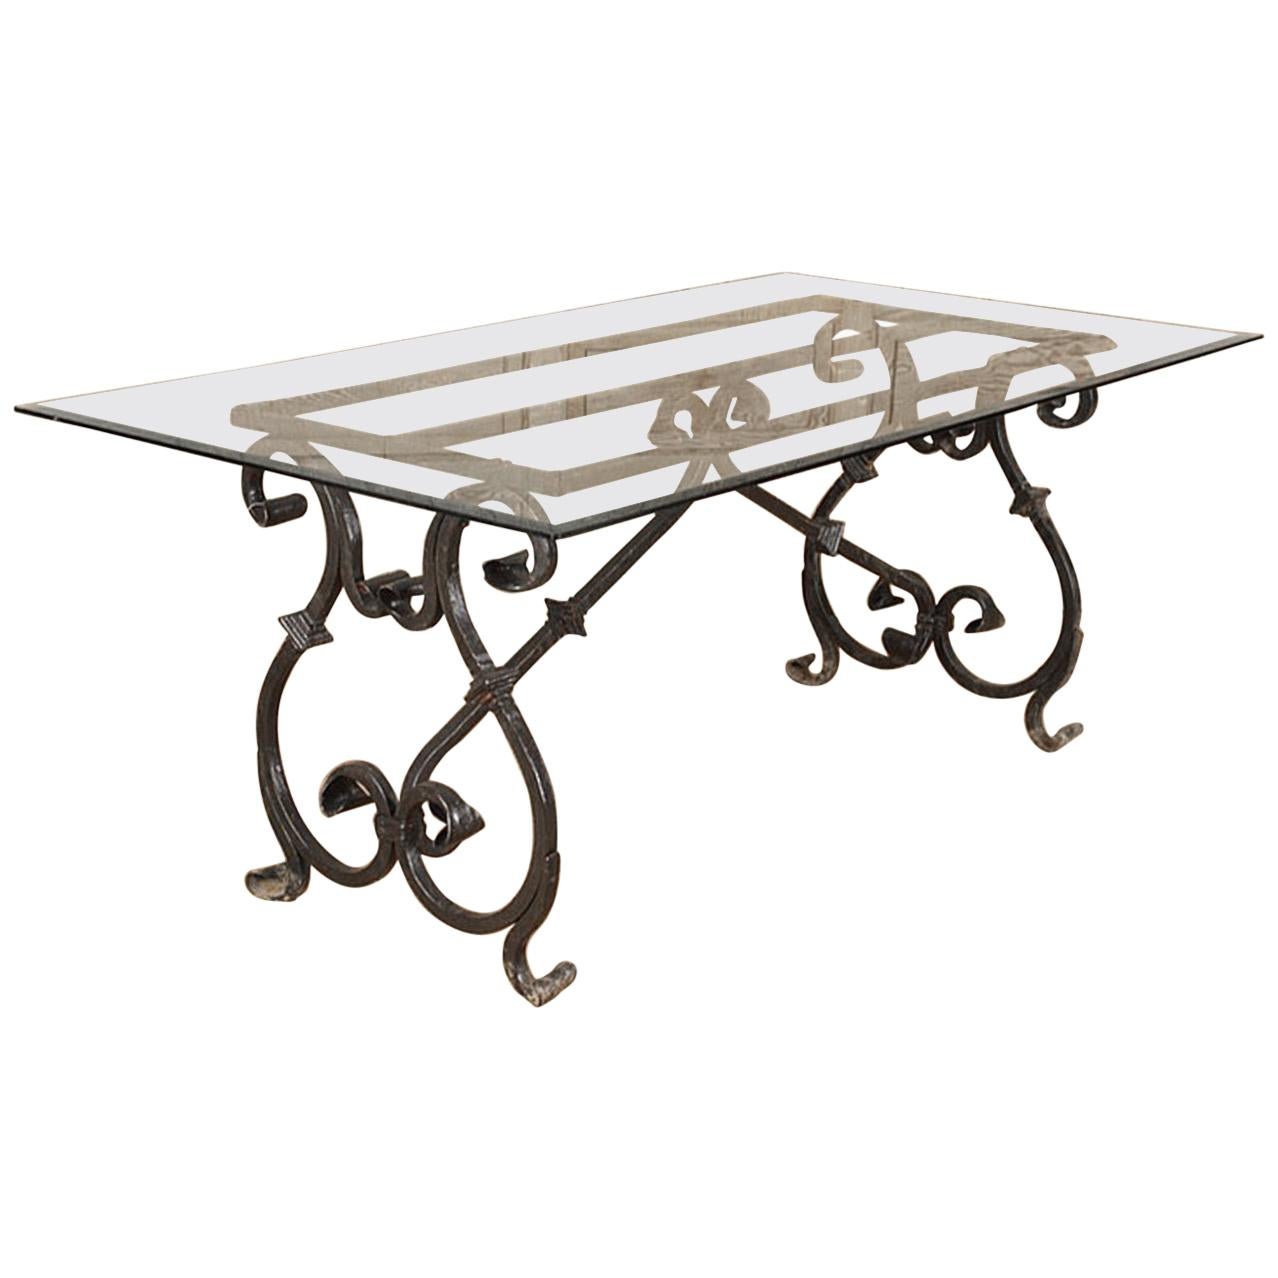 Vintage French Baroque Style Indoor or Outdoor Dining Table